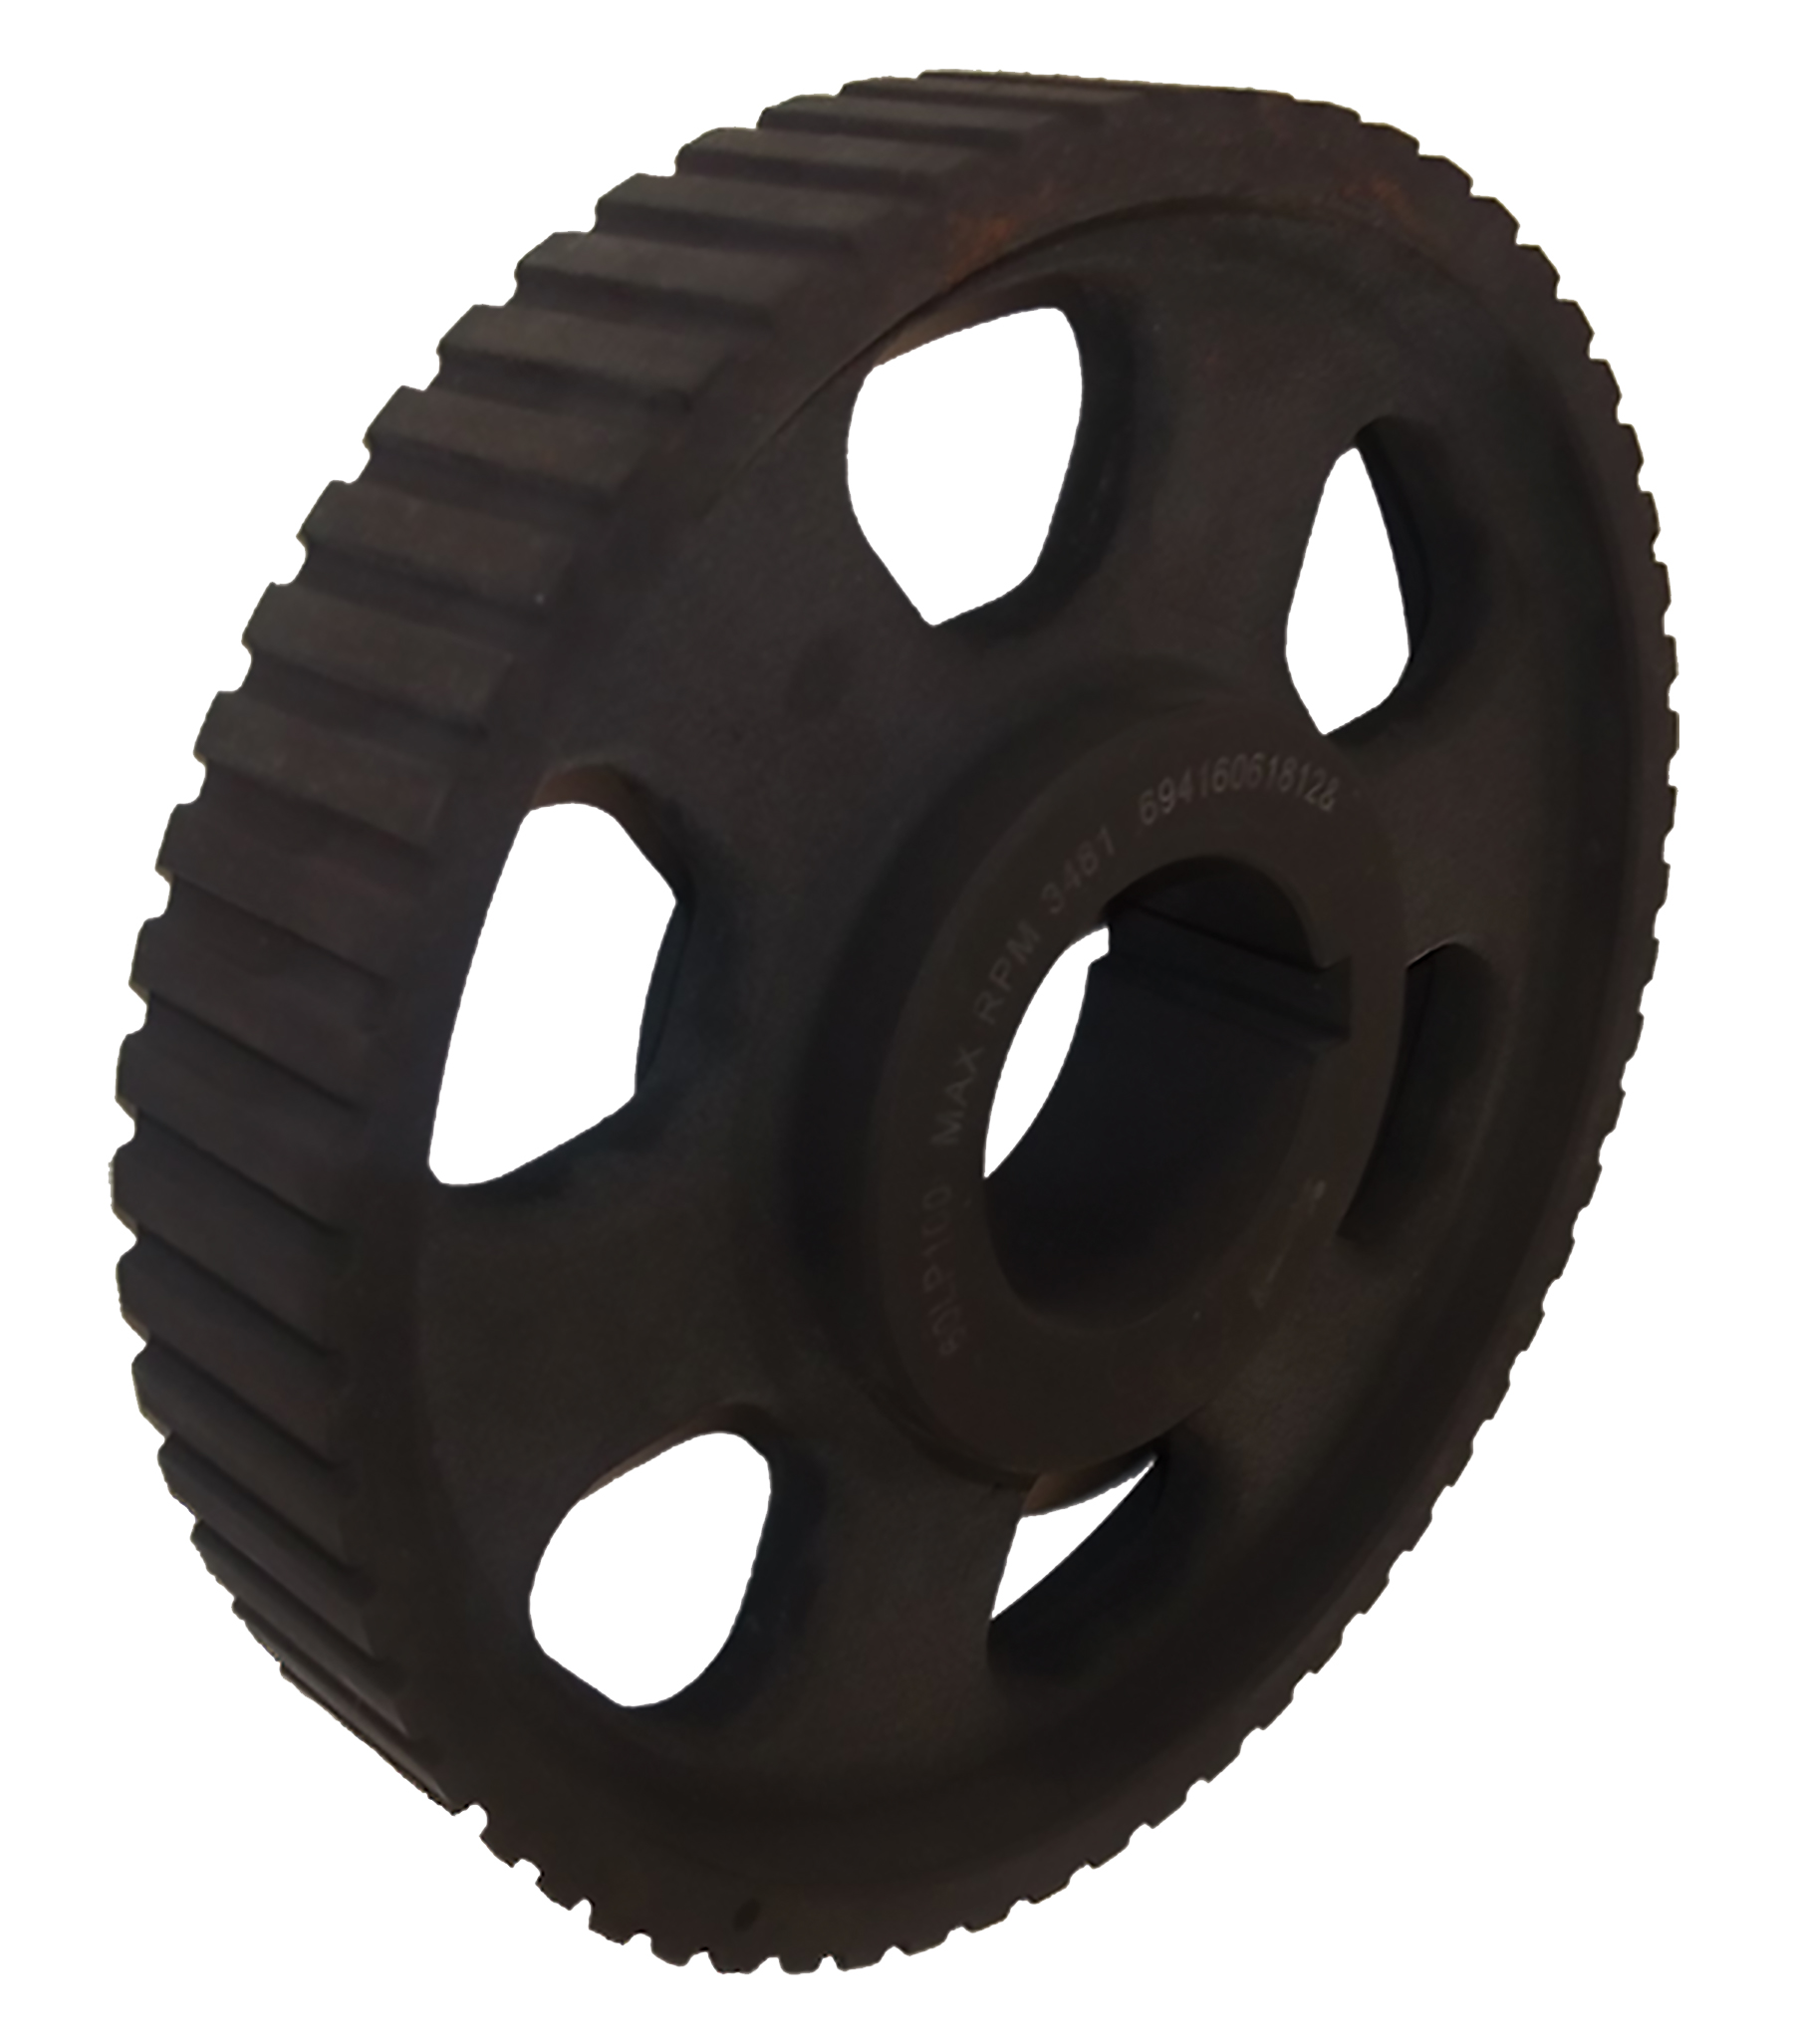 84LP100 - Cast Iron Imperial Pitch Pulleys